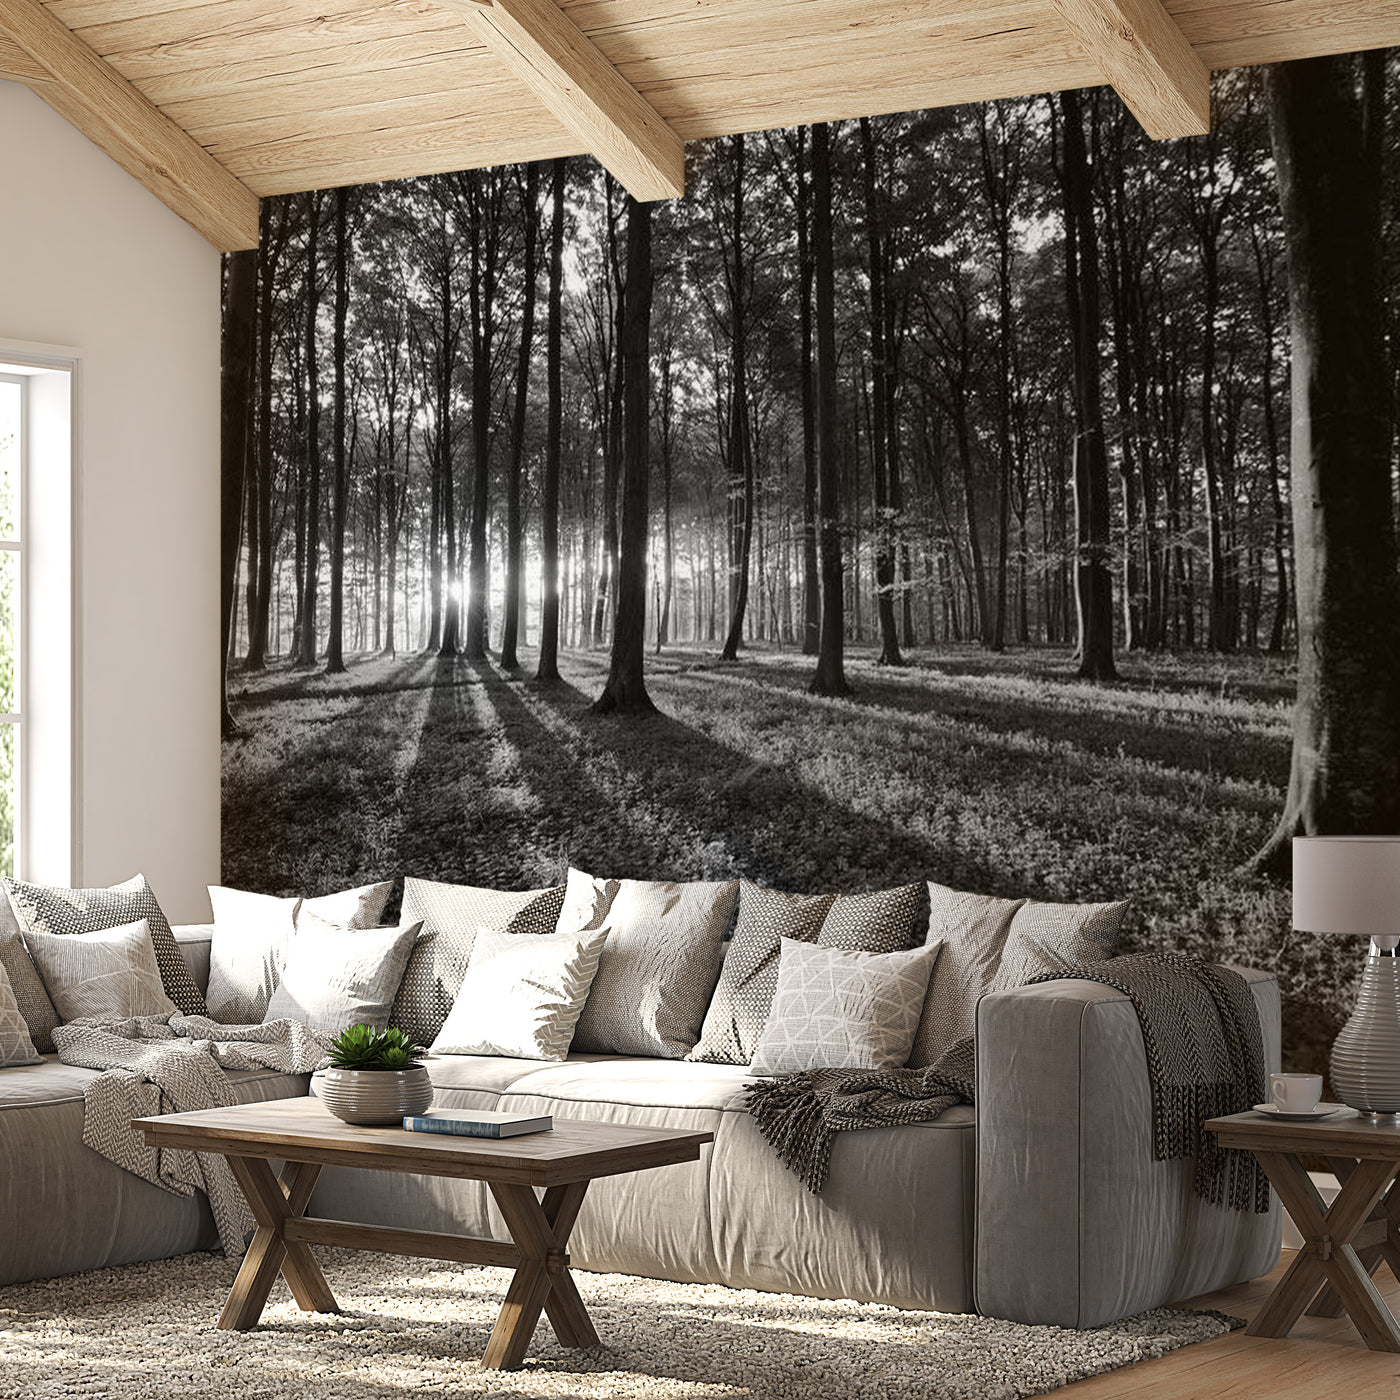 Peel & Stick Forest Wall Mural - The Light In The Forest - Removable Wall Decals